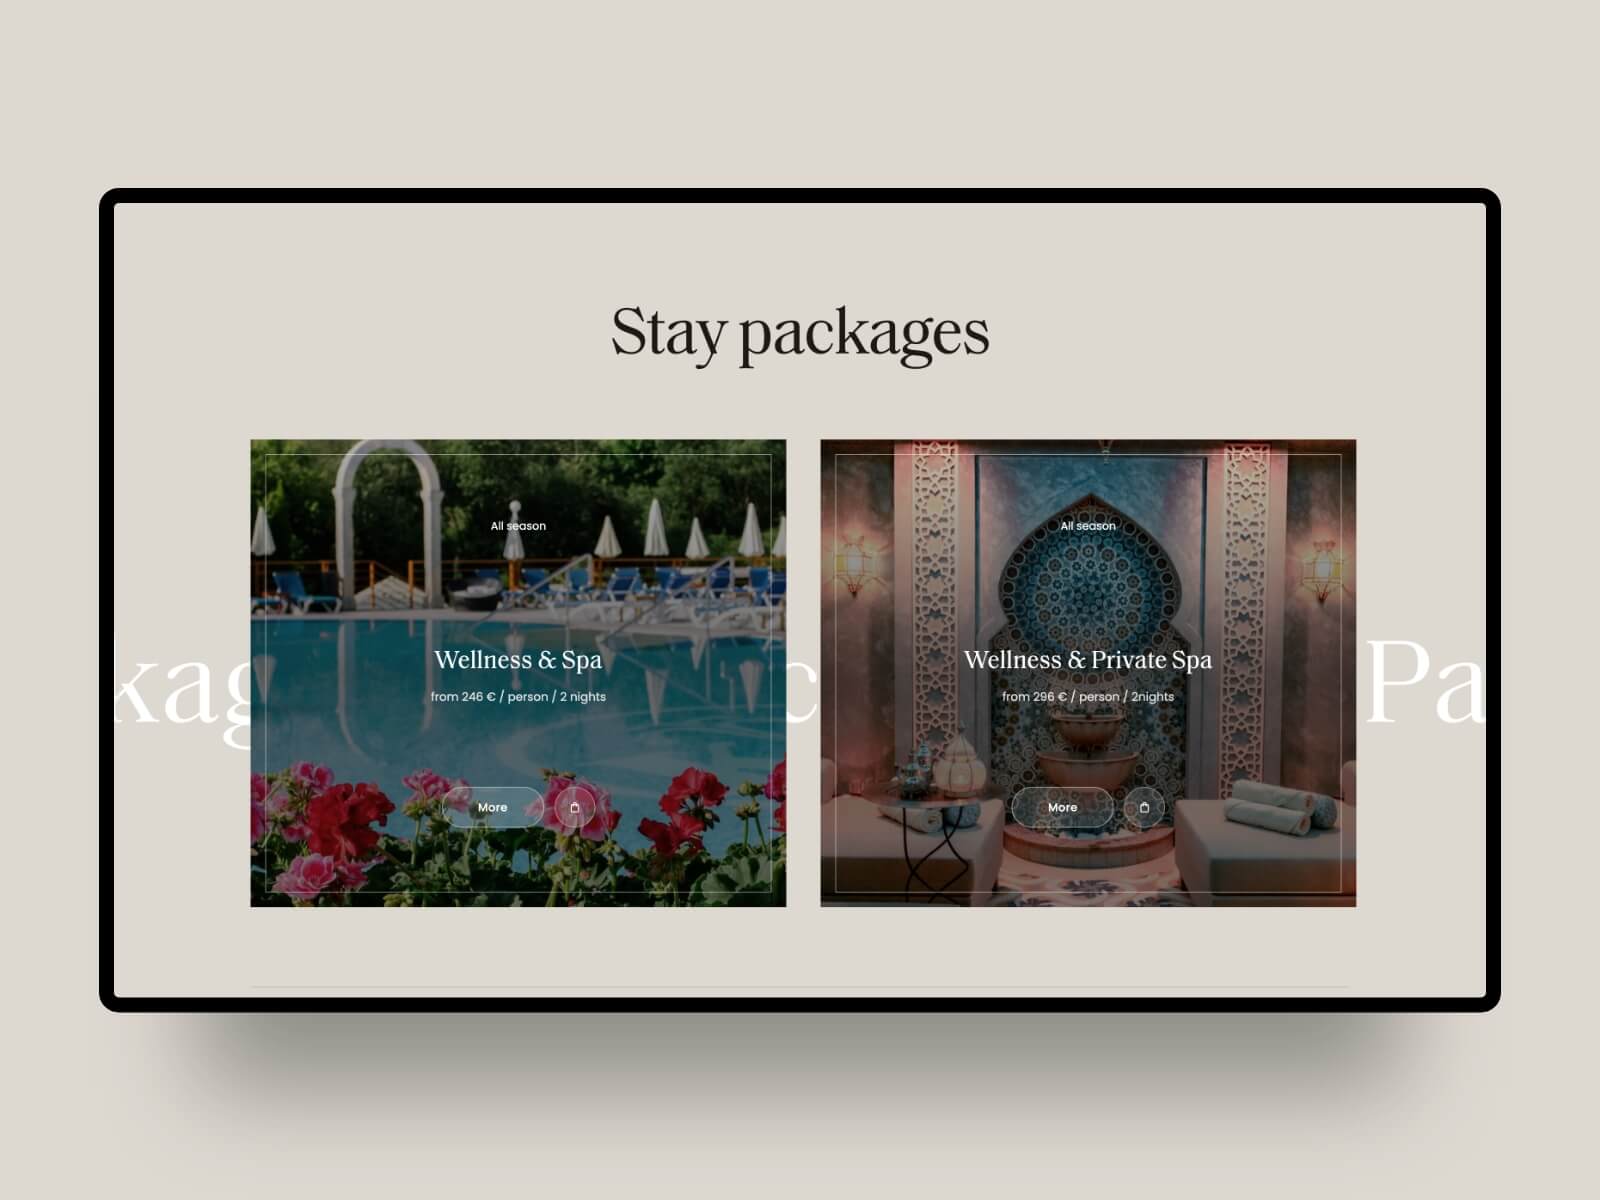 Content sections - Hotel & Spa Resort